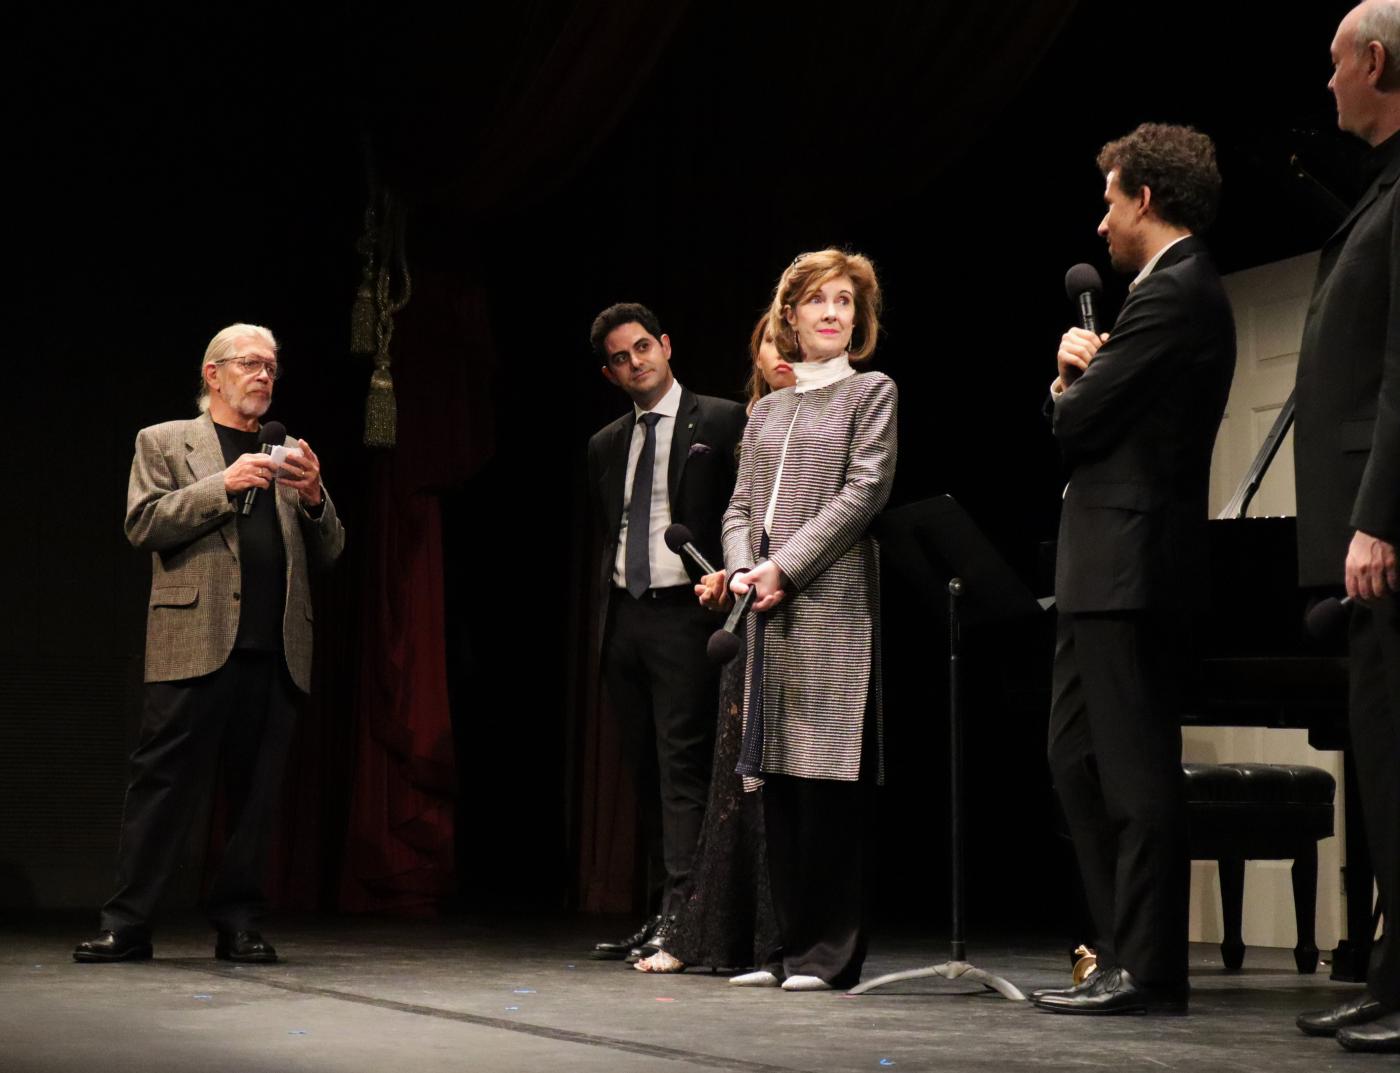 Rich asks audience questions to members of the Chamber Music Society of Lincoln Center